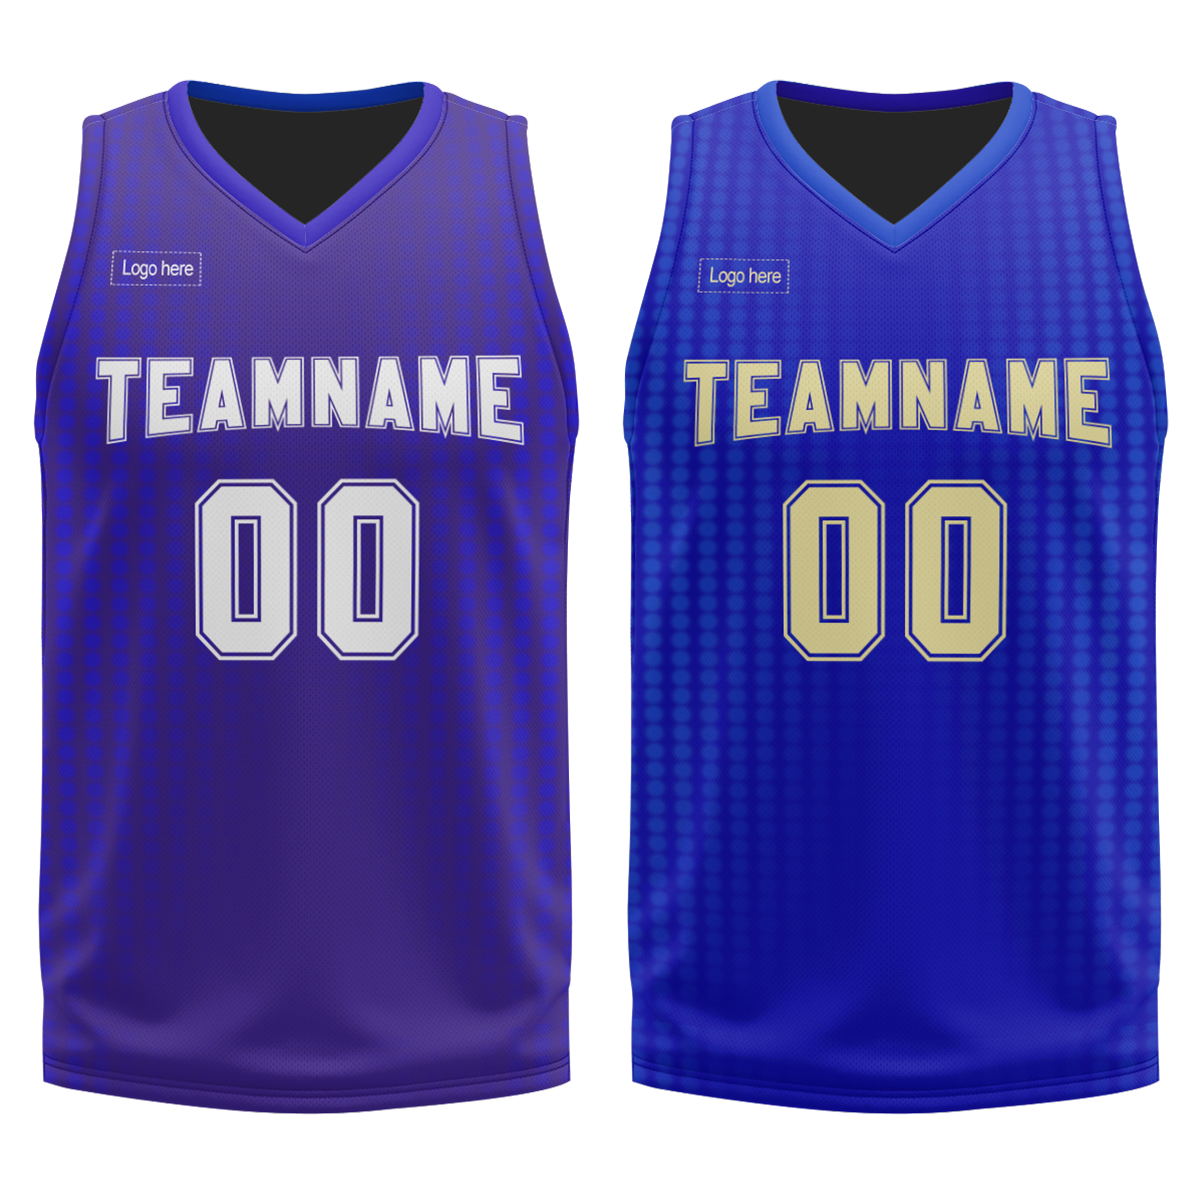 newest-customize-printed-basketball-jersey-design-color-sublimated-basketball-uniforms-set-at-cj-pod-4